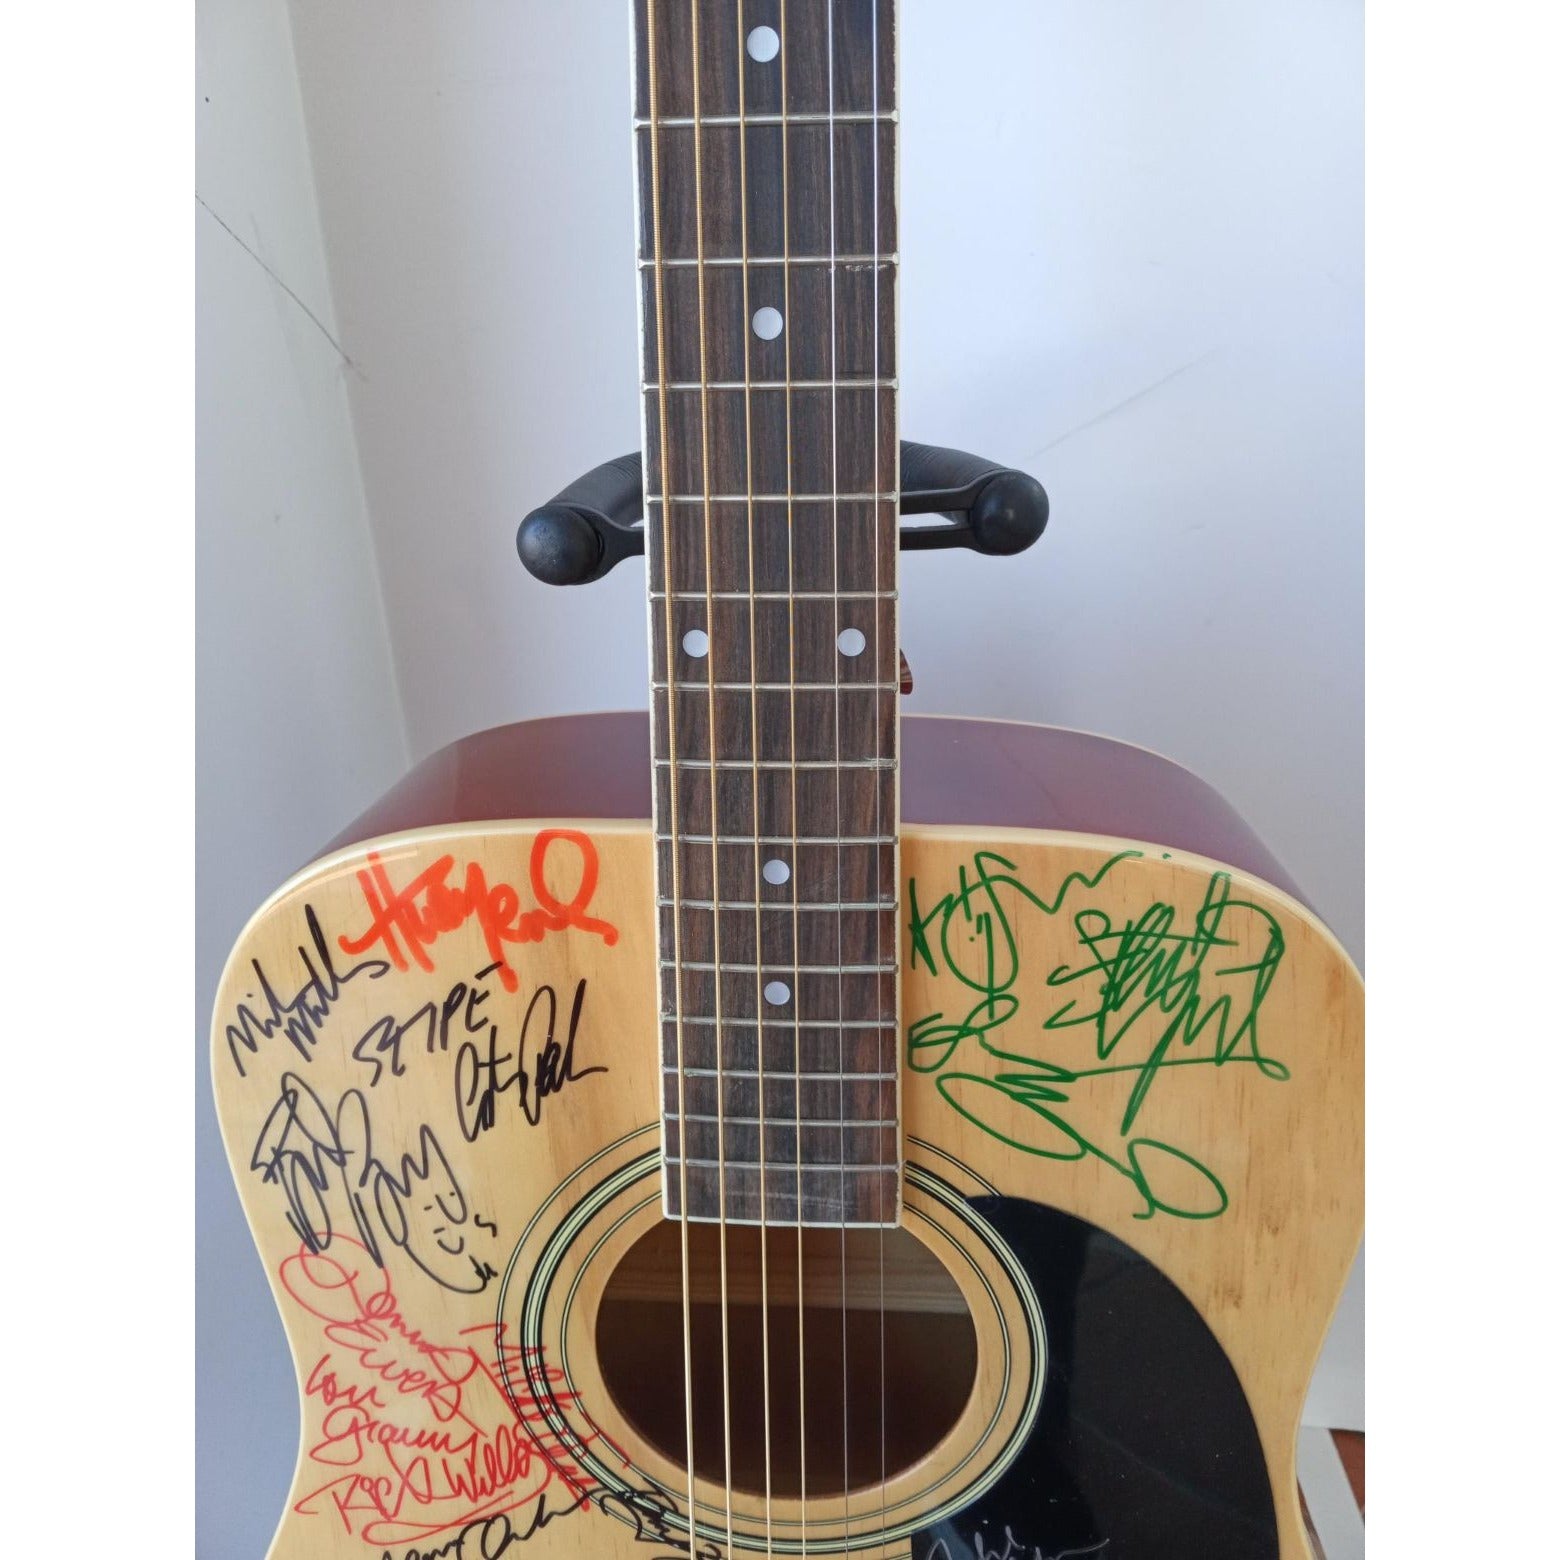 Tom Petty REM Fleetwood Mac Heart'80s Rock icons signed acoustic guitar with proof